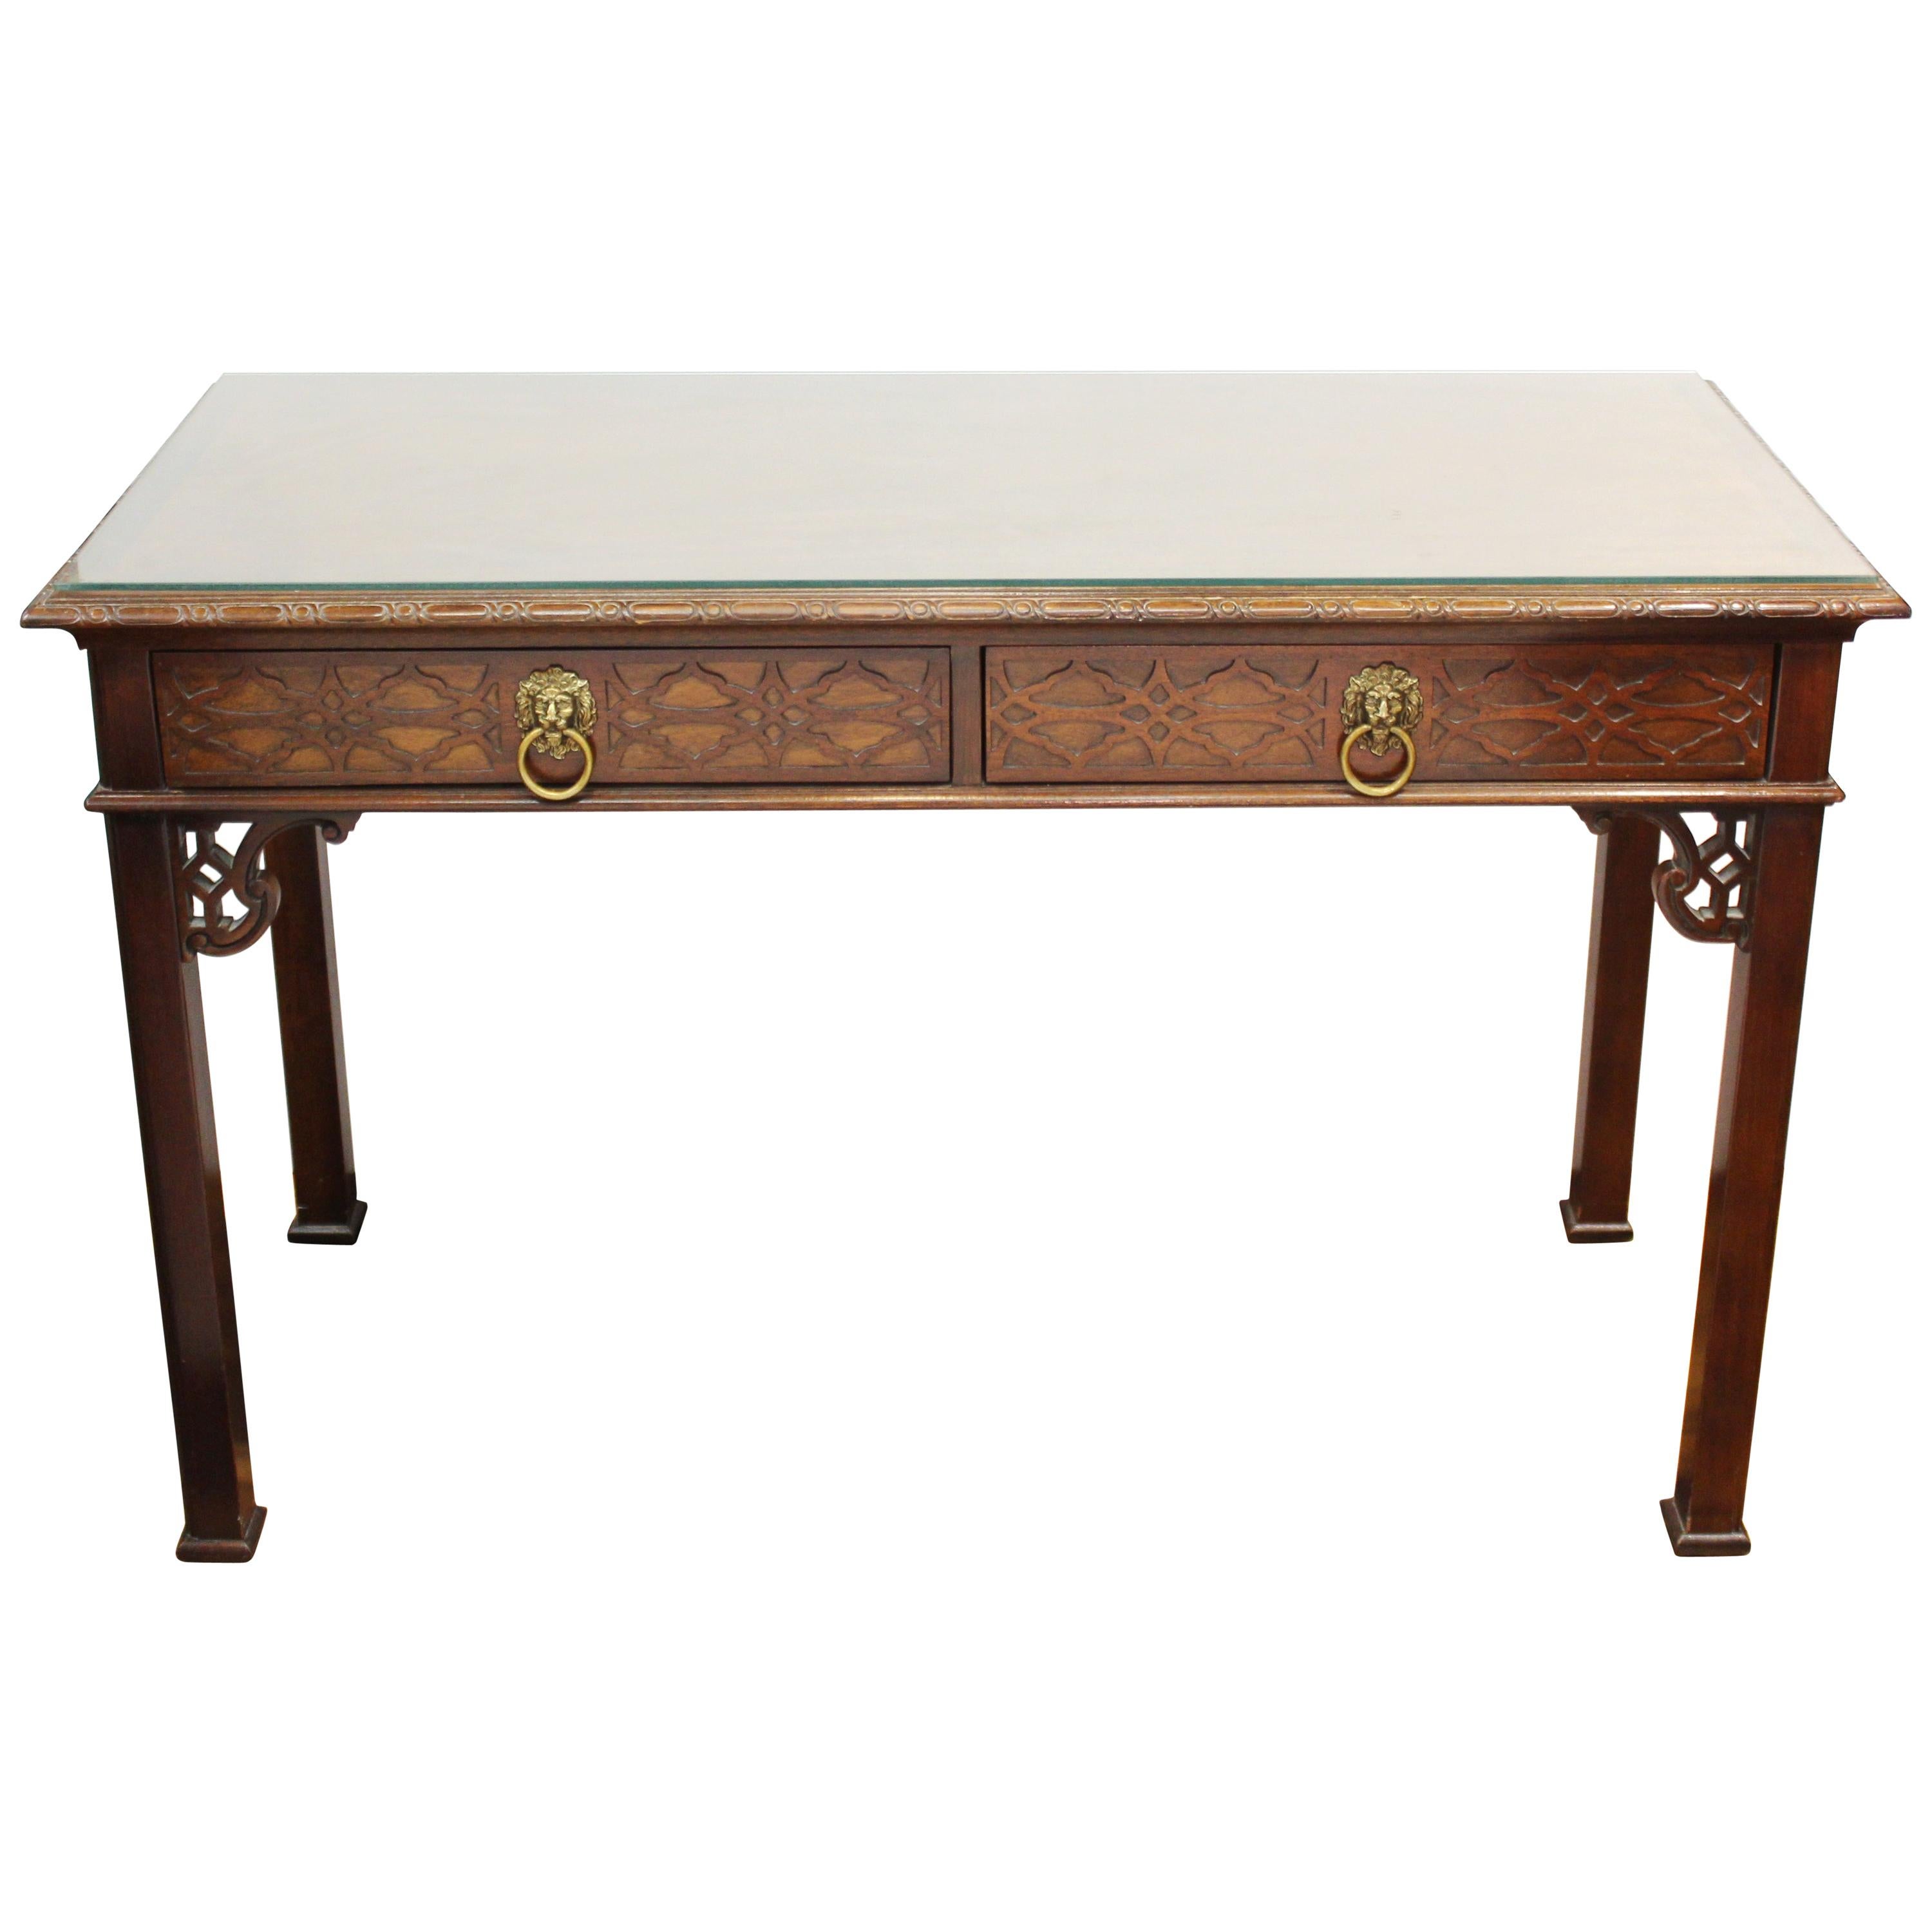 Baker Furniture Chinese Chippendale Style Console Table Desk with Glass Top